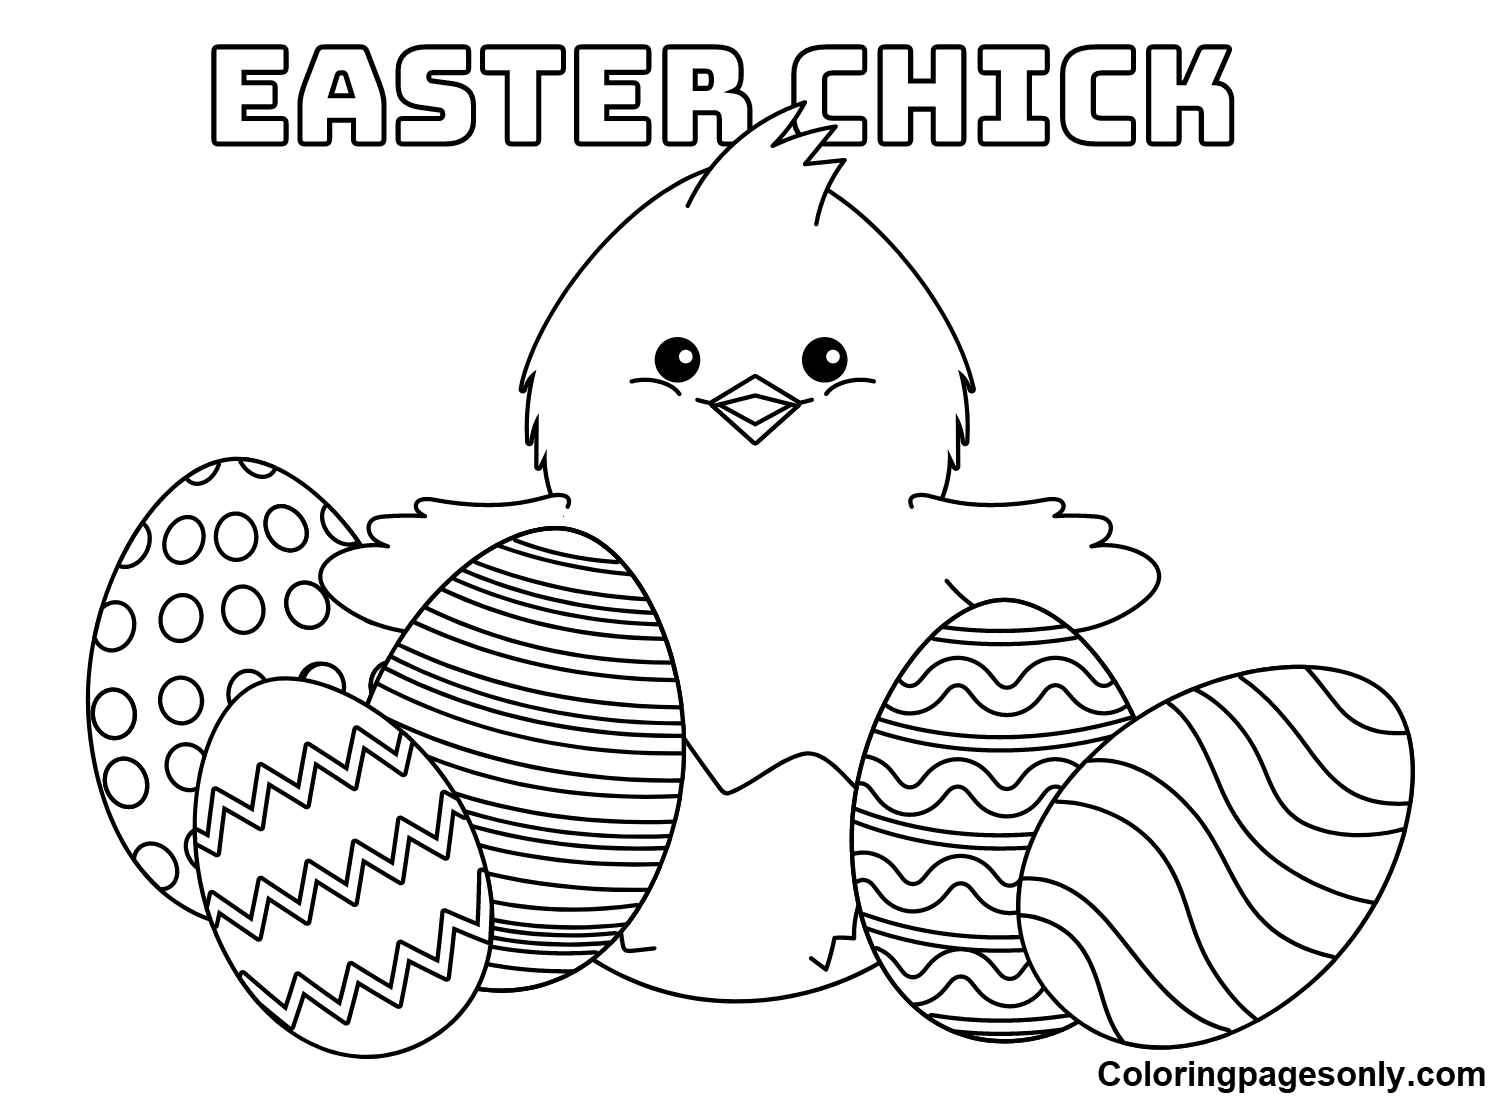 Easter Chick Pictures Coloring Page